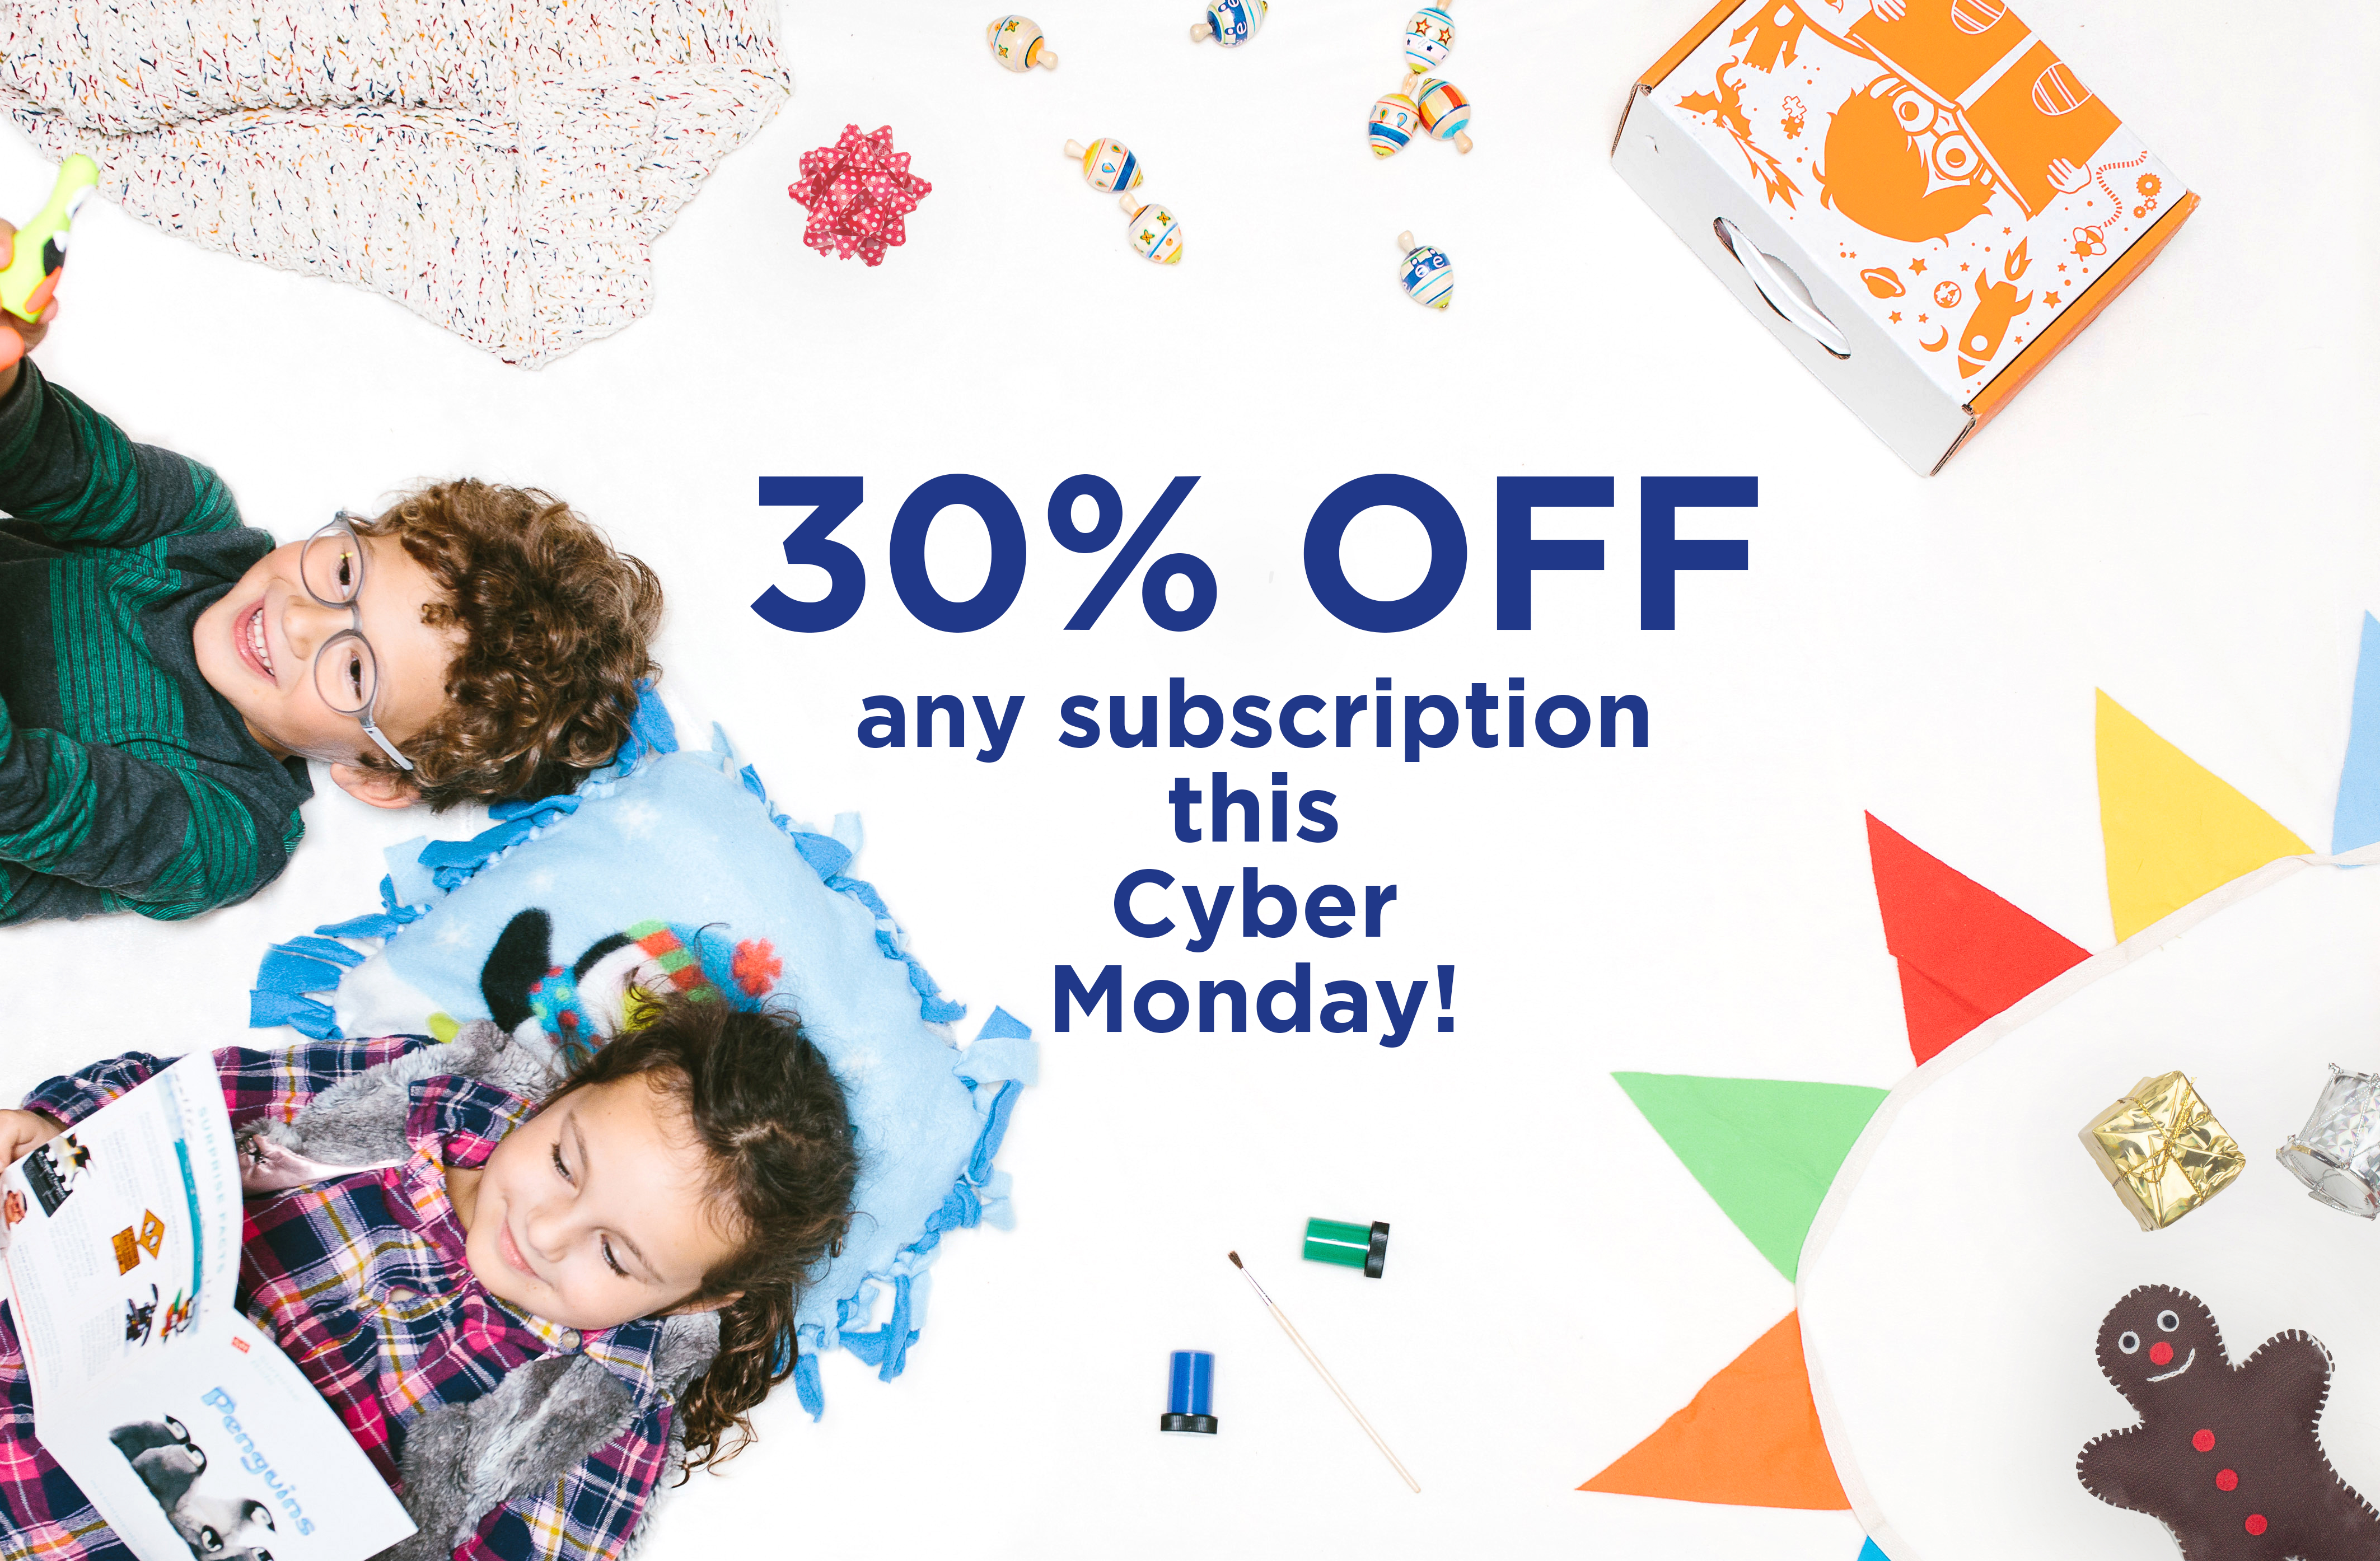 Surprise Ride Cyber Monday Deal – 30% Off Your First Box!